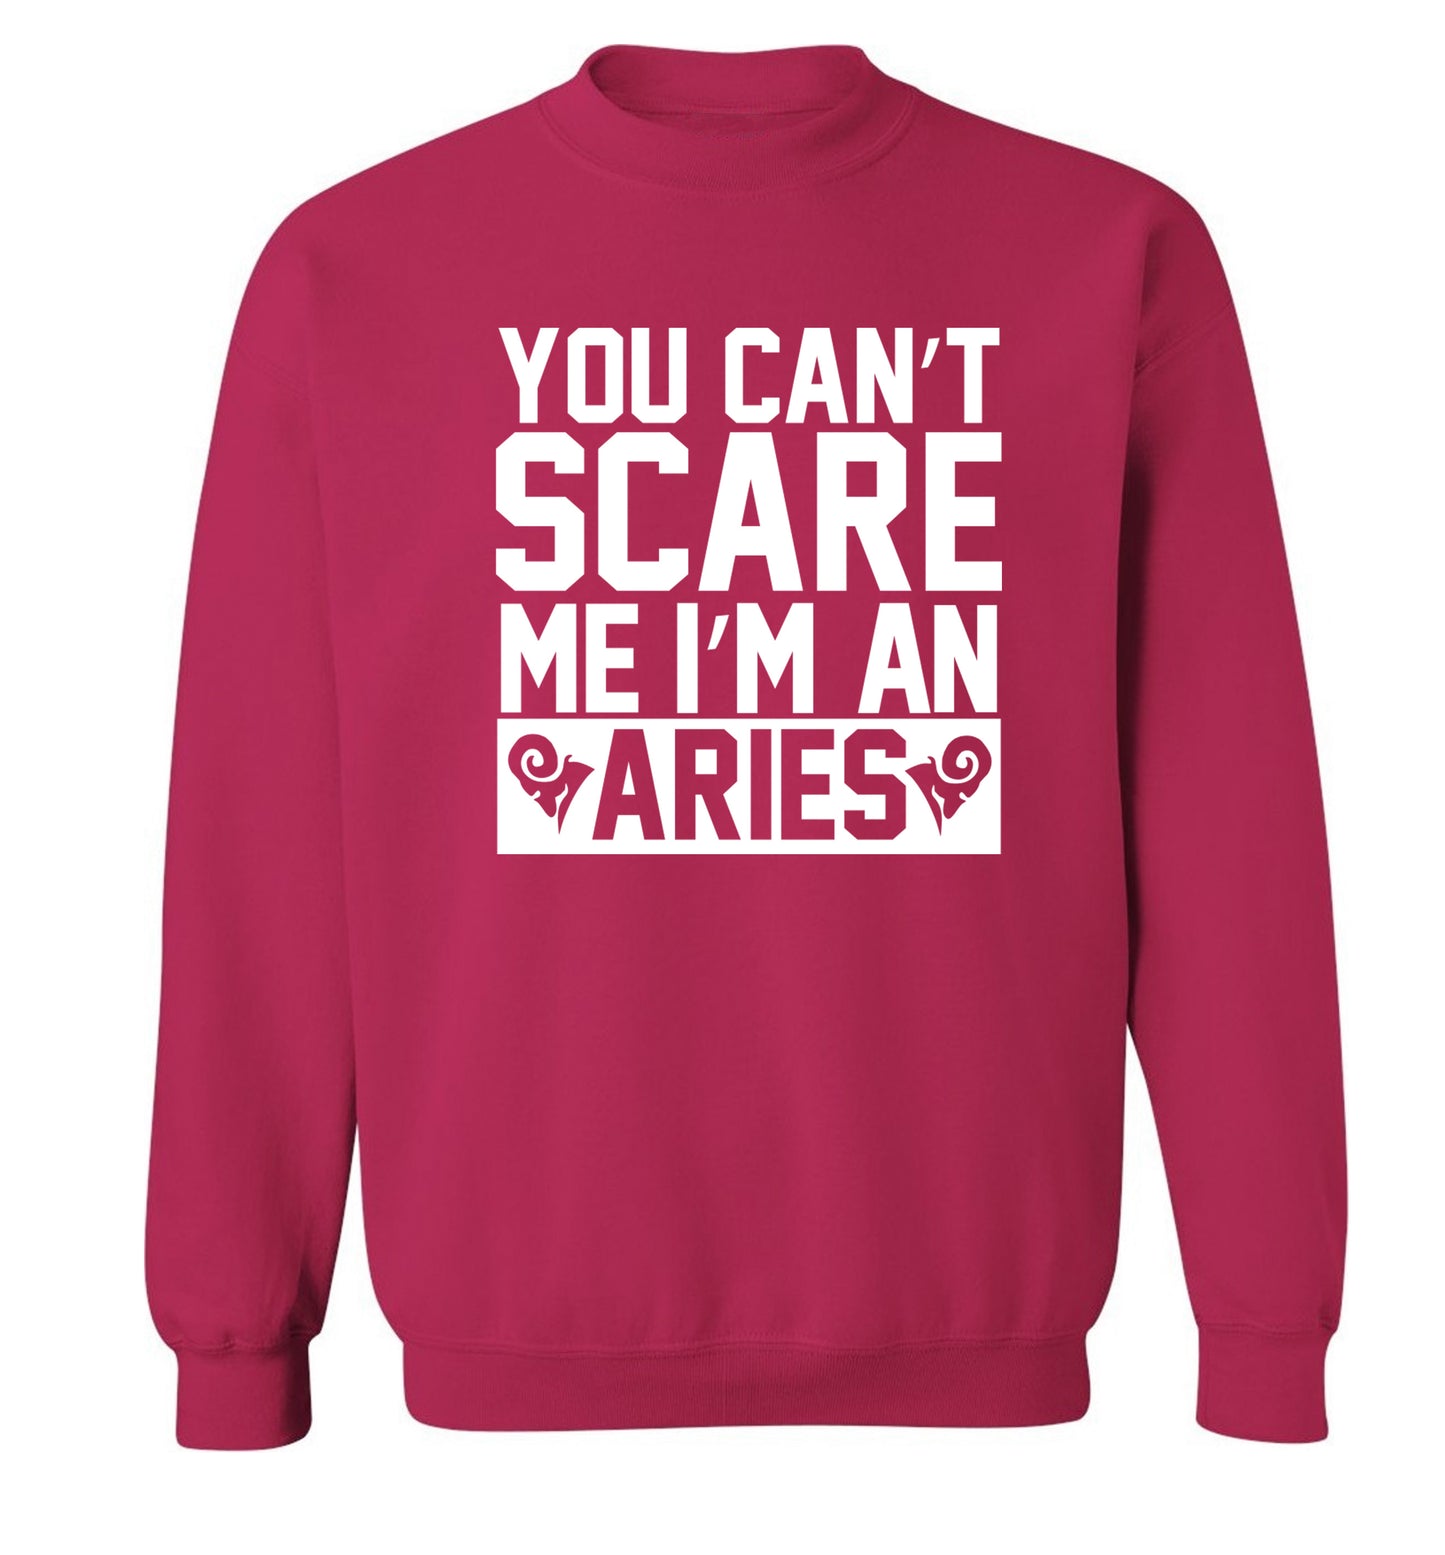 You can't scare me I'm an aries Adult's unisex pink Sweater 2XL